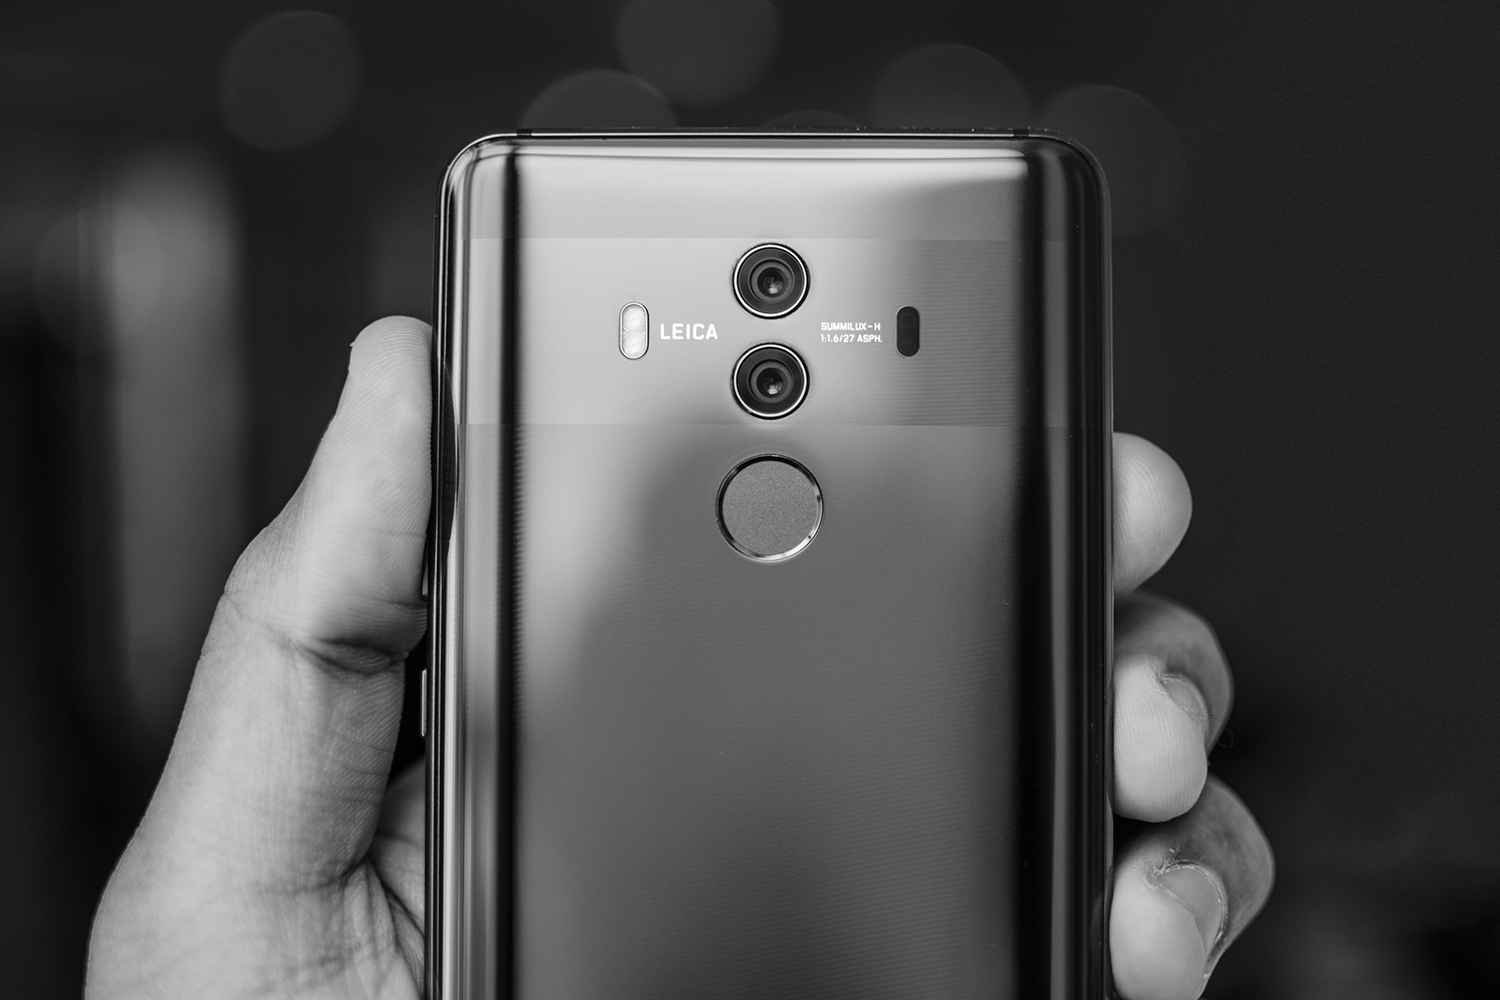 Denso Accidentalmente suma Huawei Replaced The Monochrome Lens On The Mate 20 With A Filter | Digital  Trends